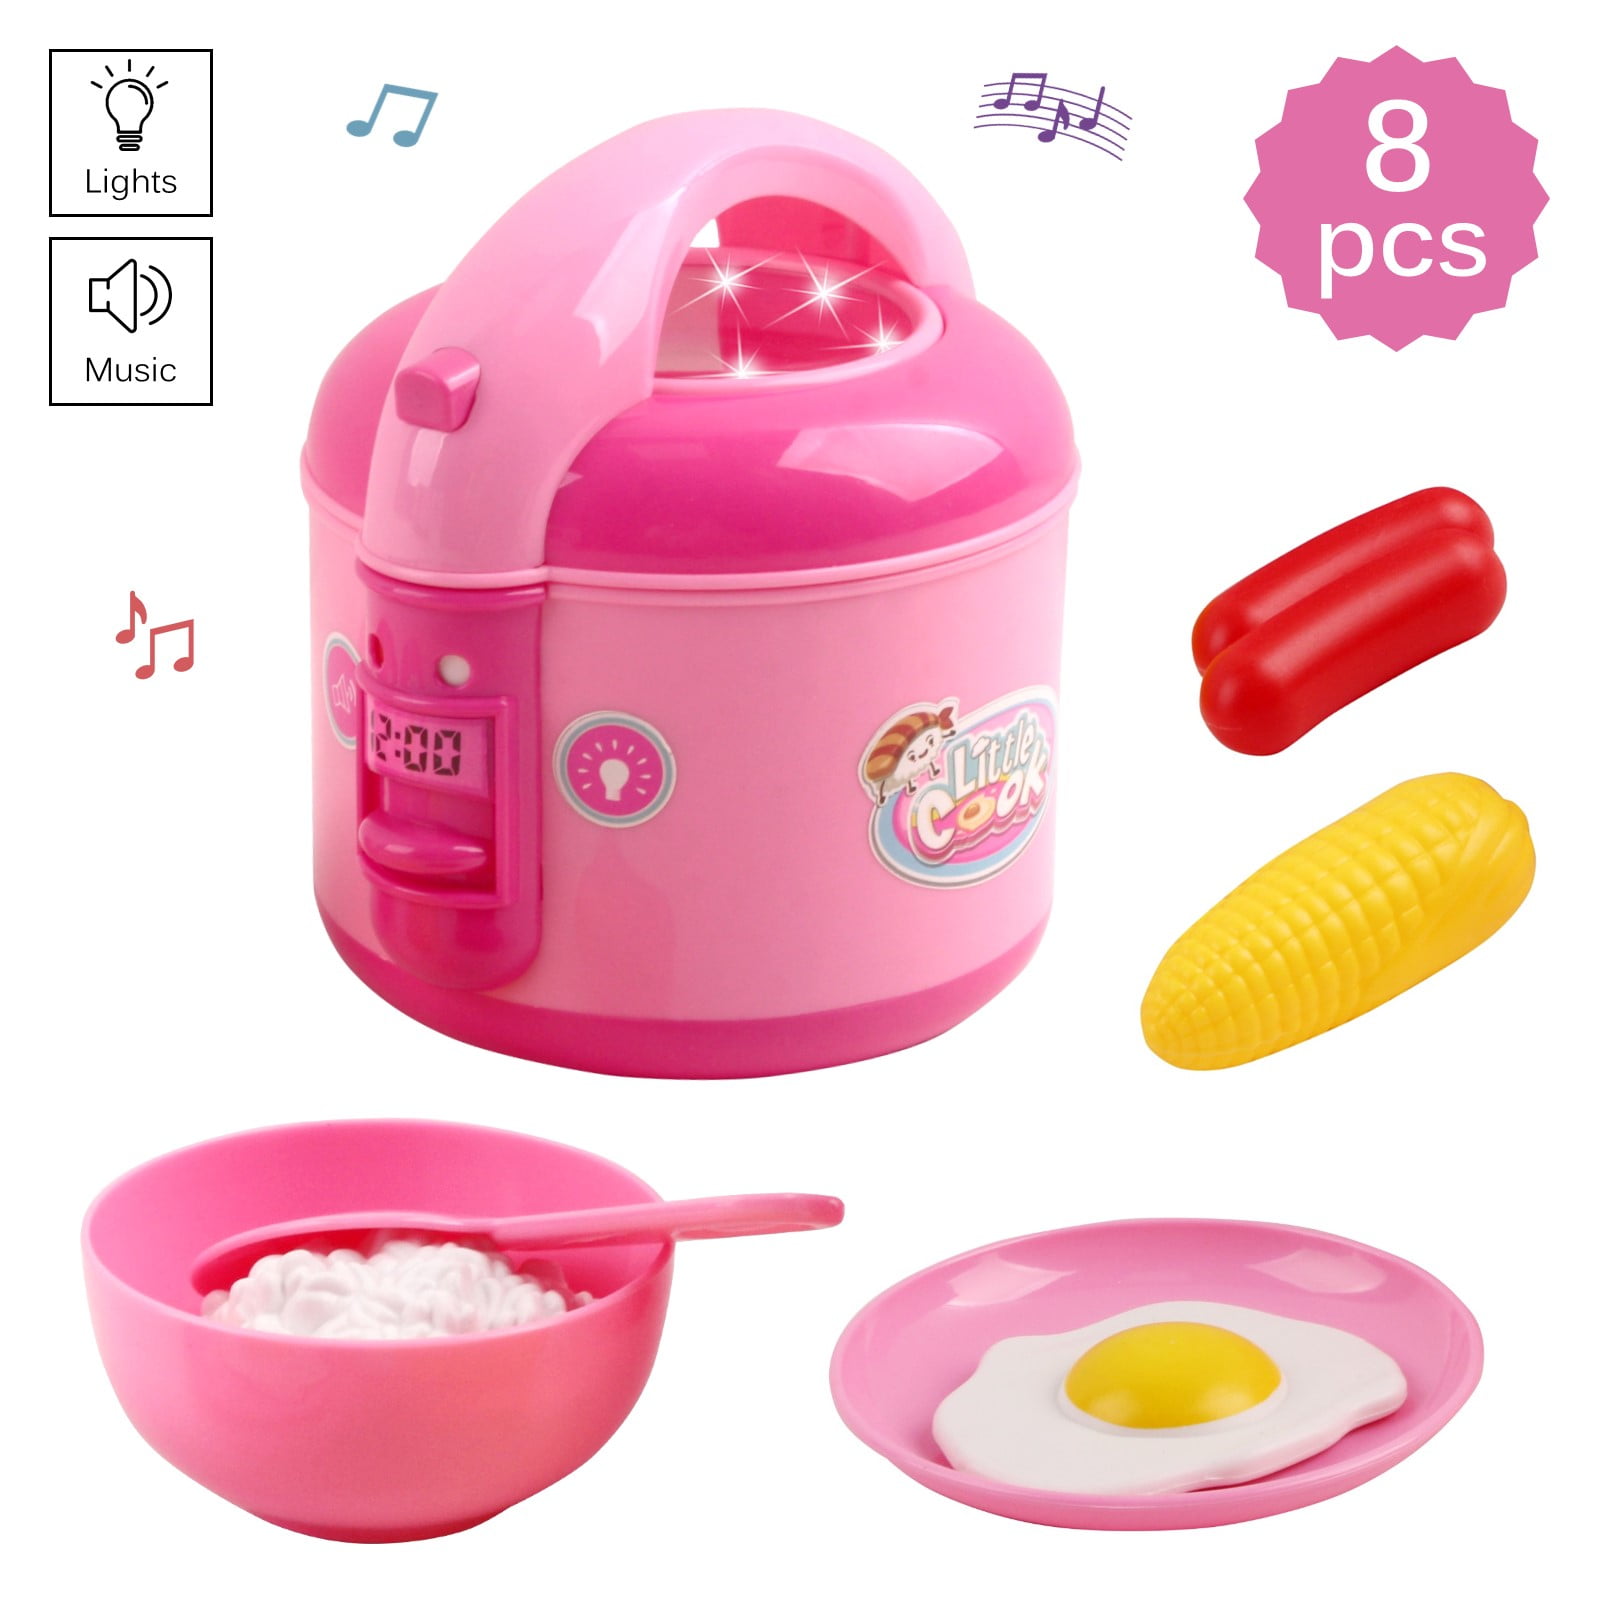 Fun Play House Wooden Rice Cooker Little Chef Cooking Kitchen Pretend Toys 